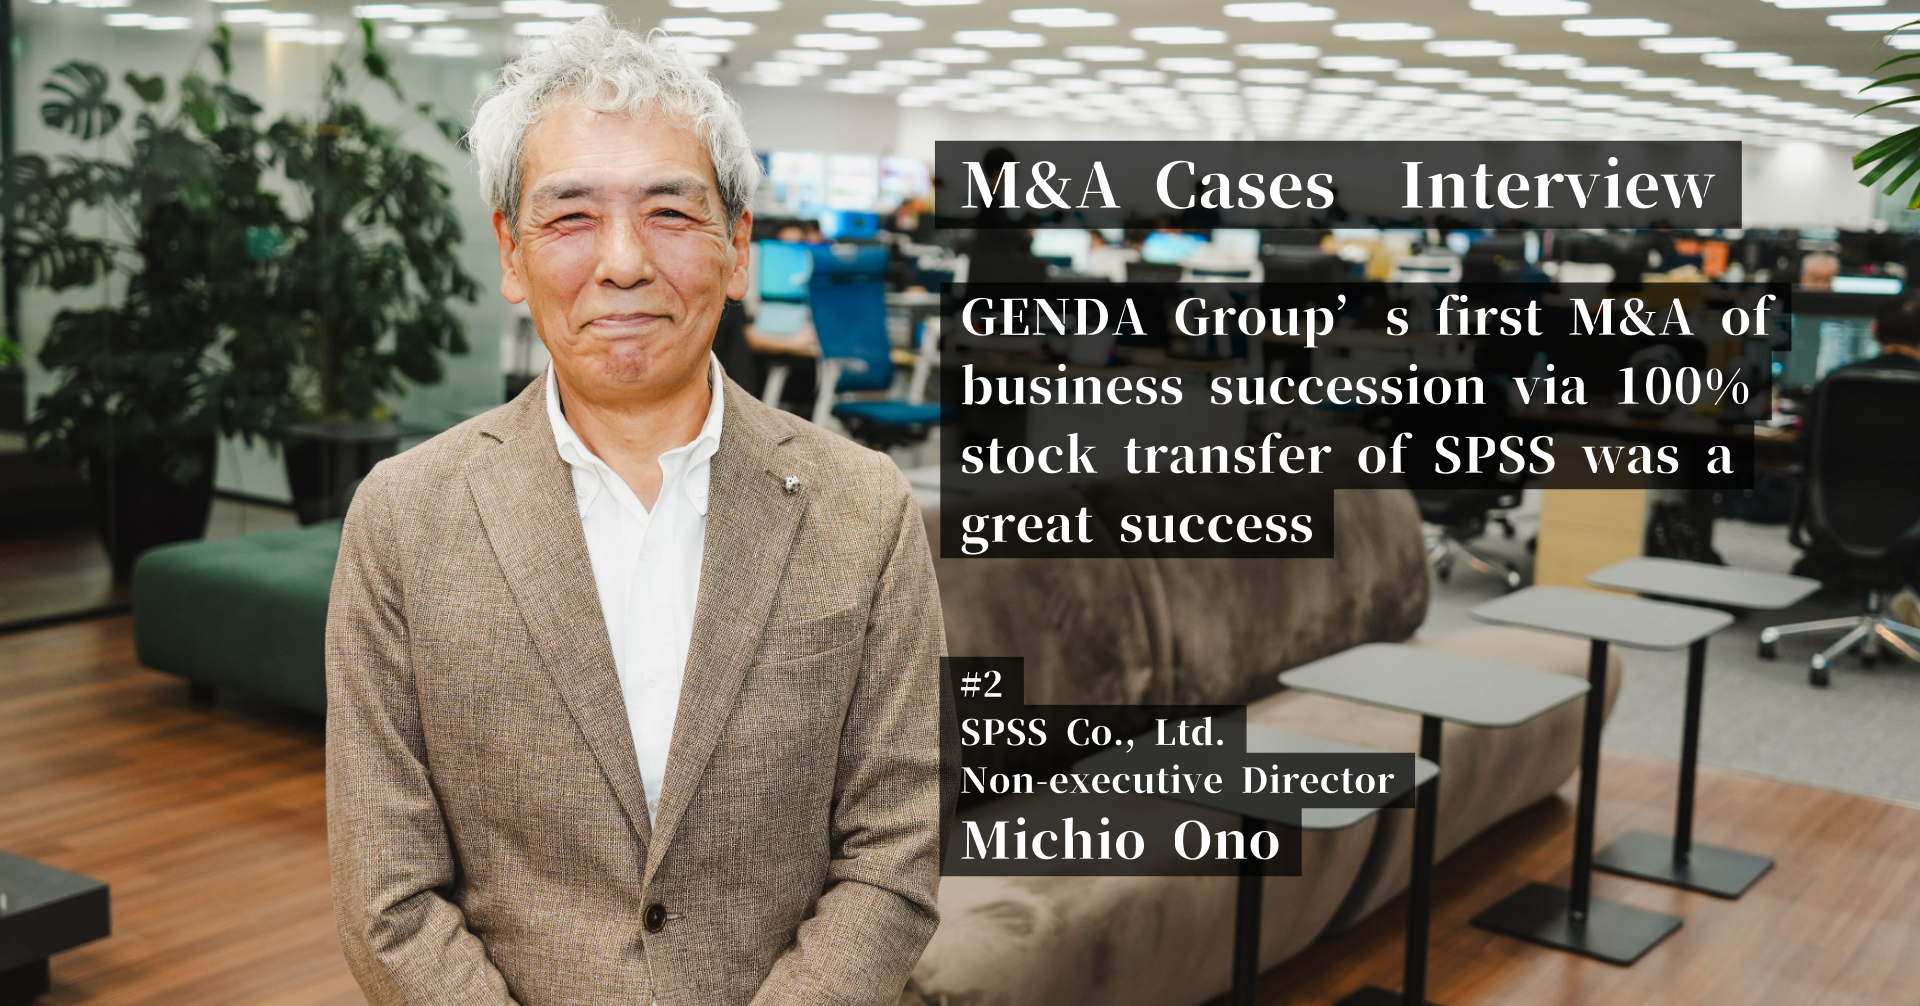 #2 GENDA Group’s first M&A of business succession via 100% stock transfer of SPSS was a great success – SPSS.